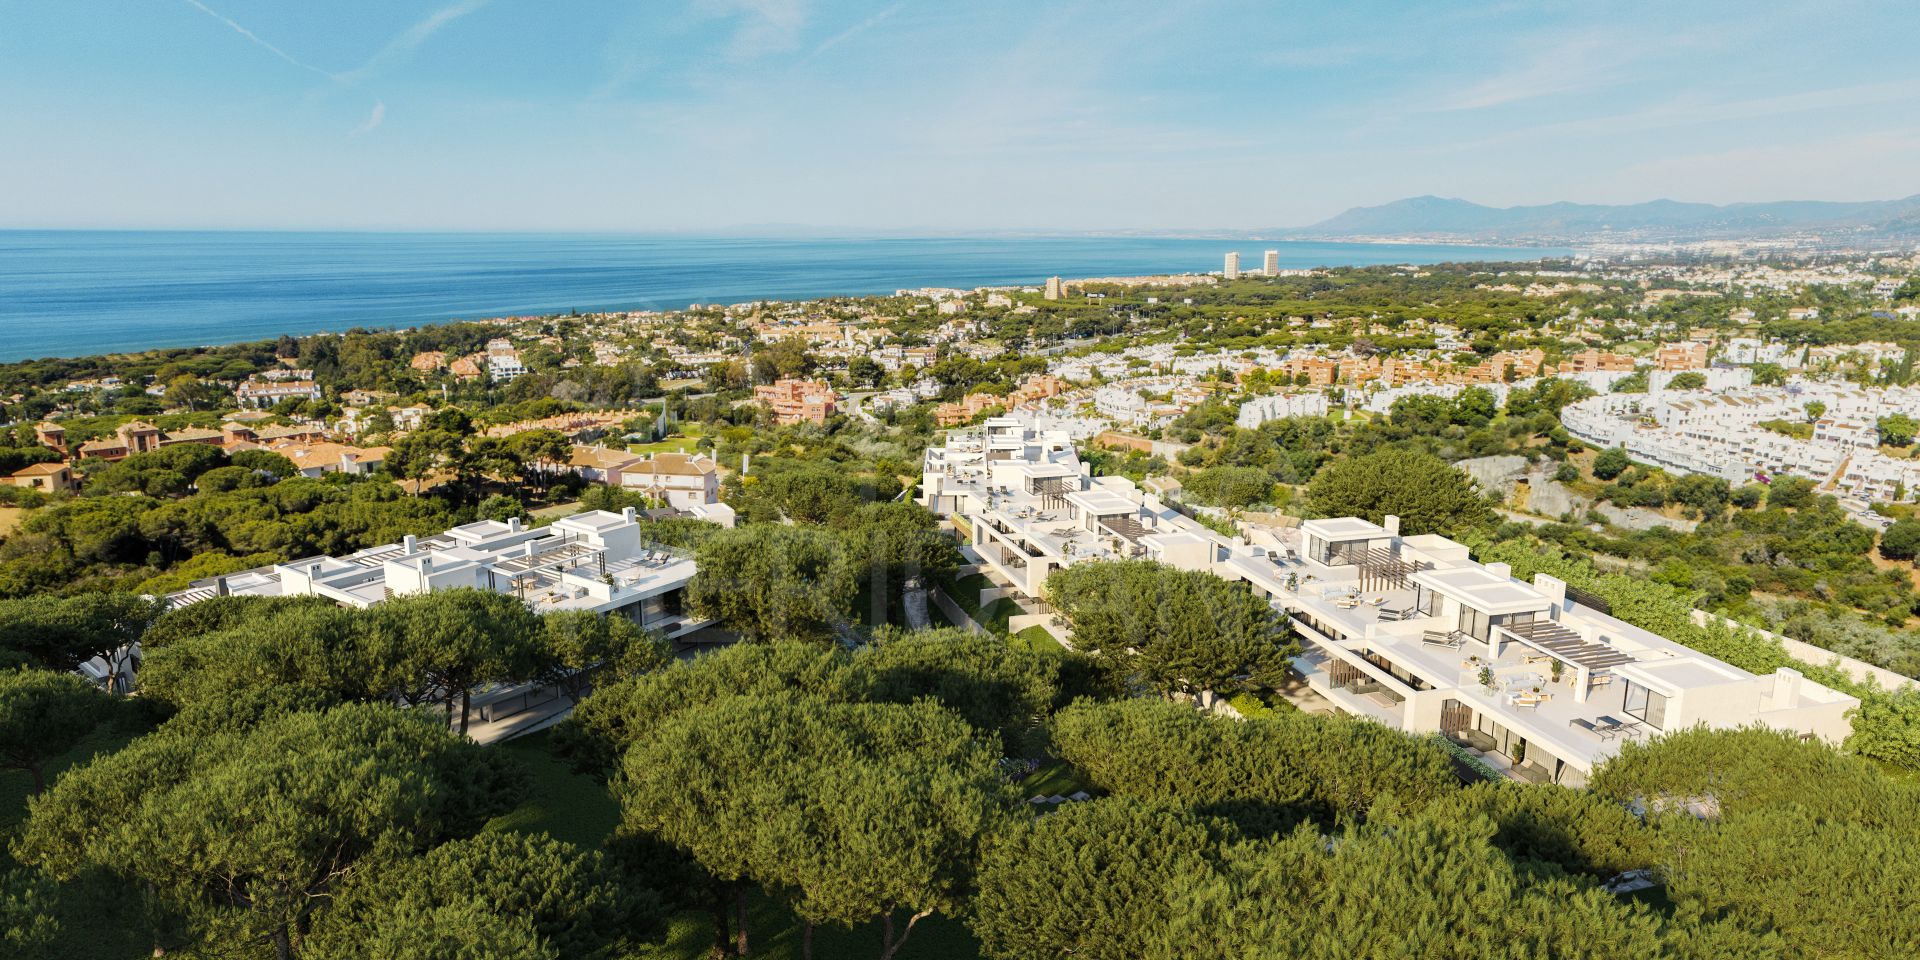 Venere Marbella, Marbella East - Venere Marbella: two- and three-bedroom apartments and penthouses, close to Cabopino beach and marina